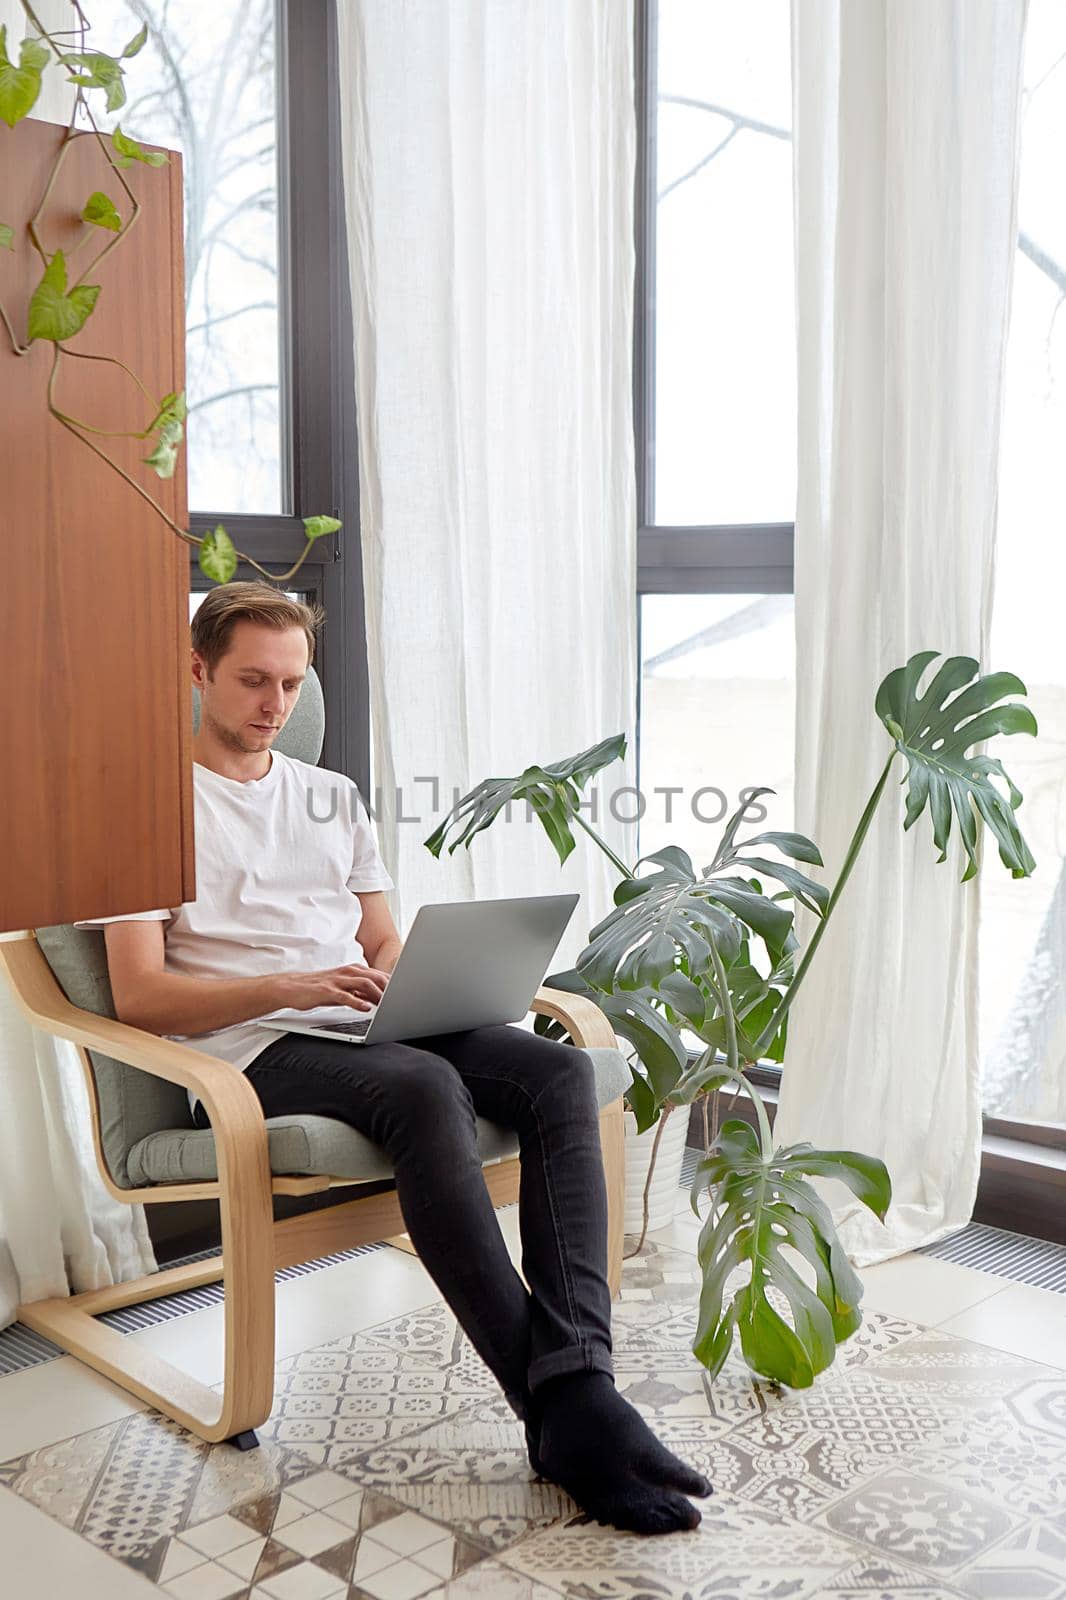 Surfing web at home. Handsome young man working on laptop while sitting in big comfortable chair at home